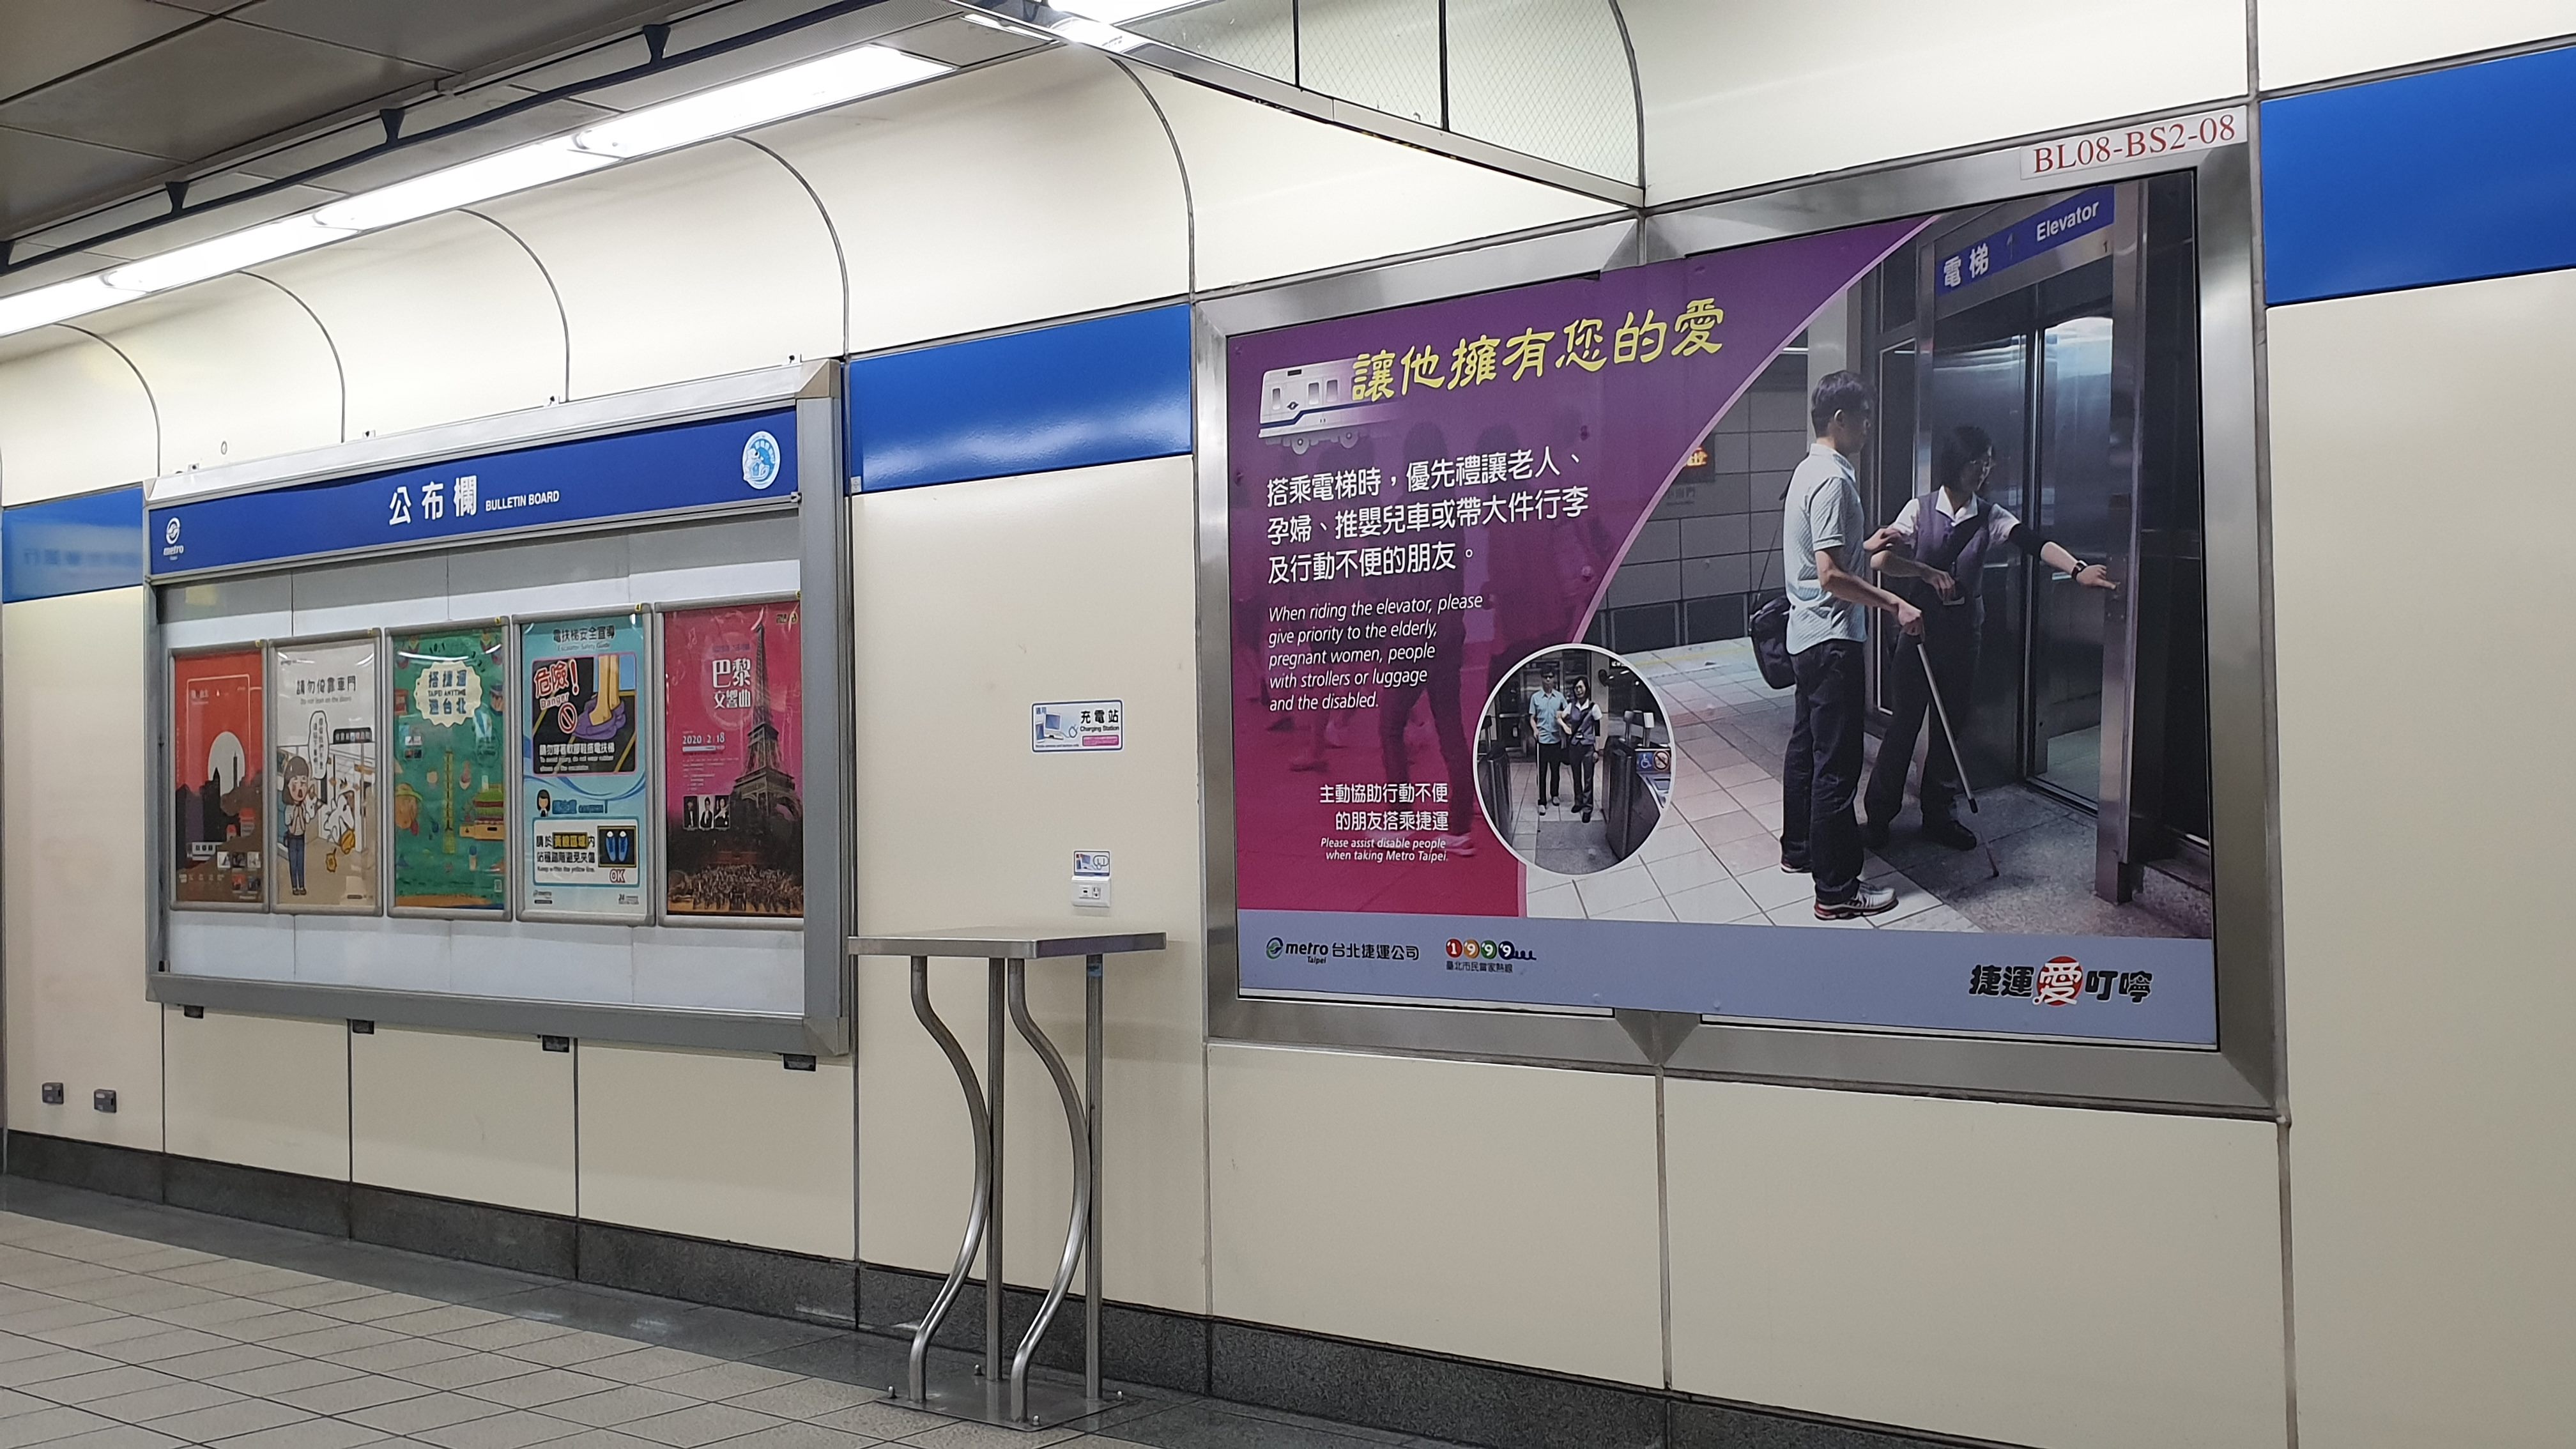 The public can start using the charging station from now on. (Photo / Provided by the Taipei Metro)